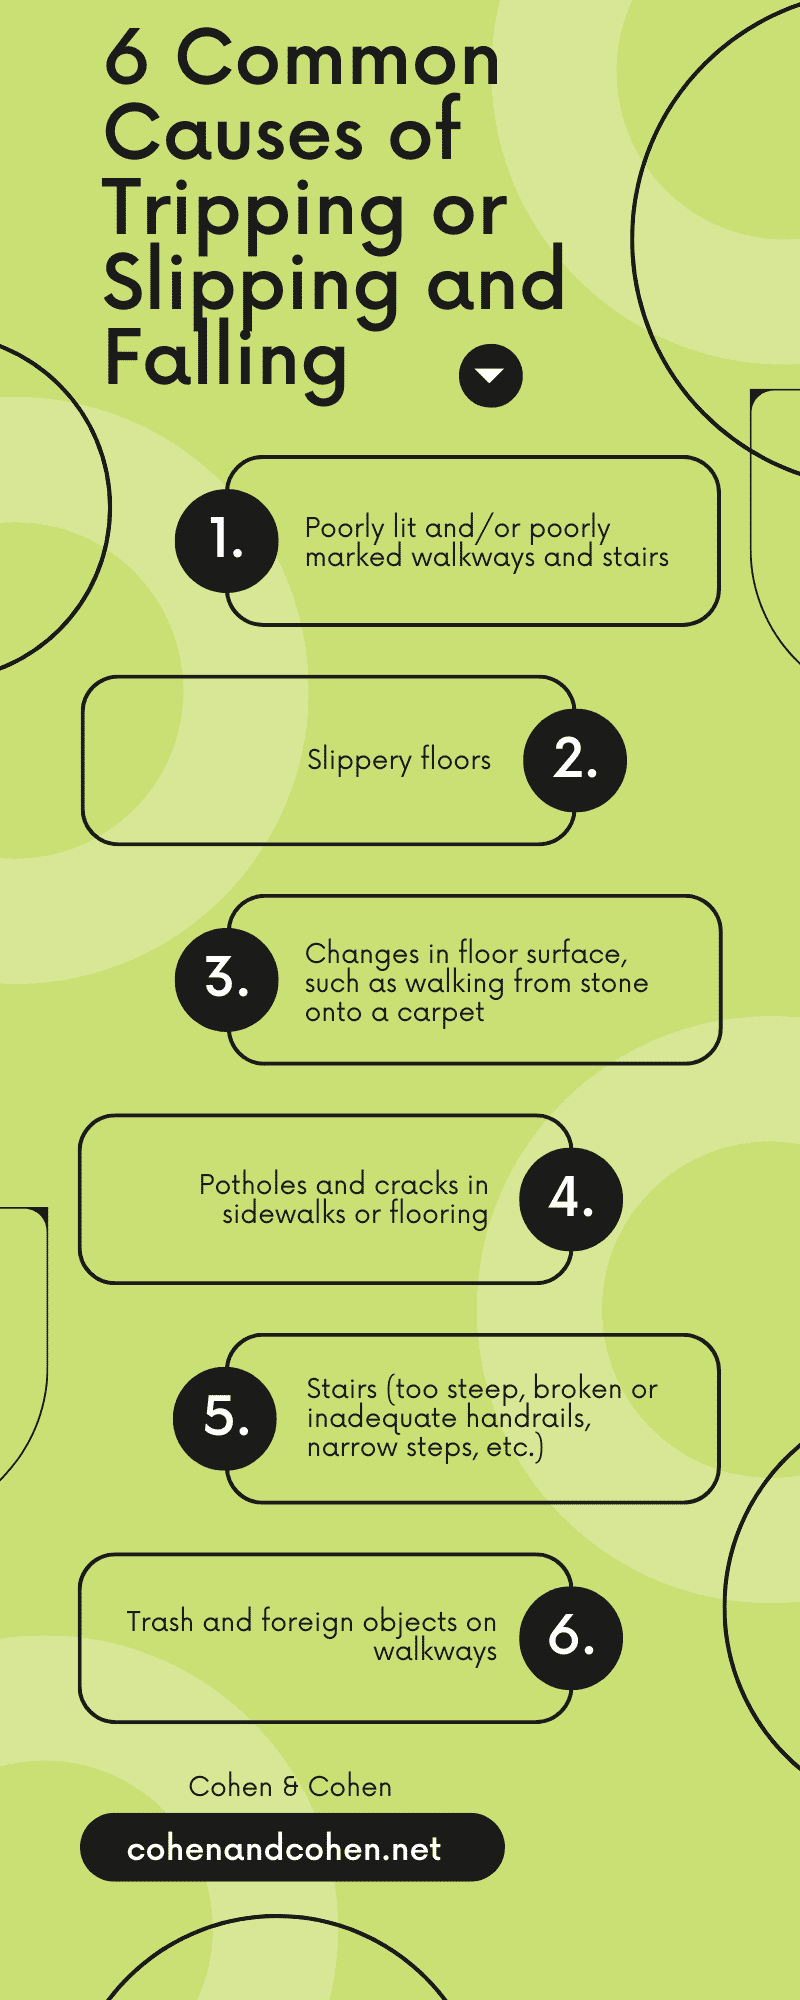 6 Common Causes of Tripping or Slipping and Falling Infographic